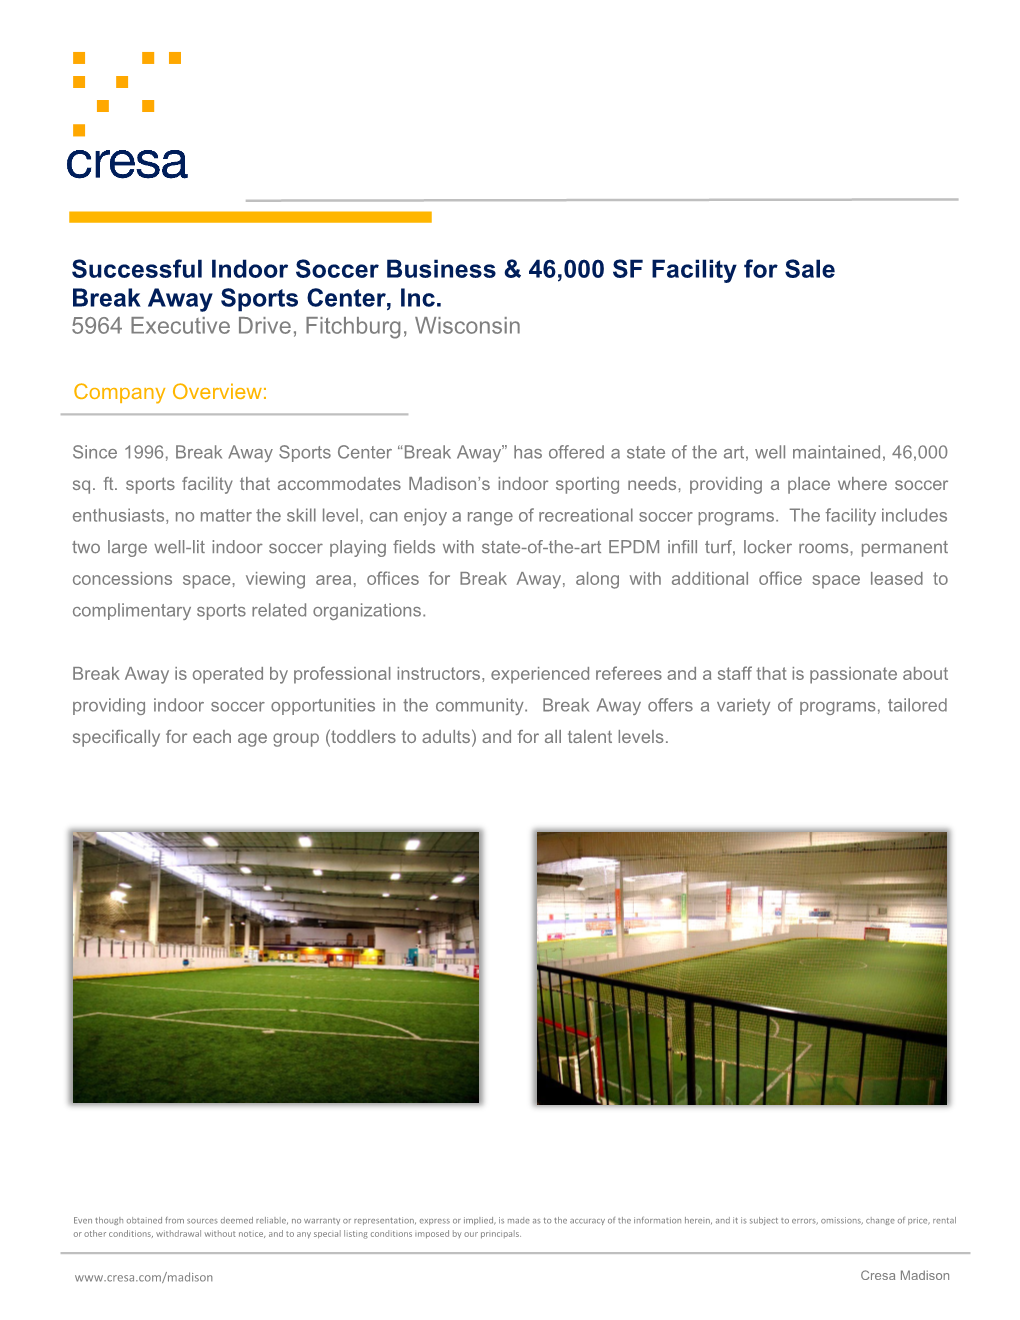 Successful Indoor Soccer Business & 46,000 SF Facility for Sale Break